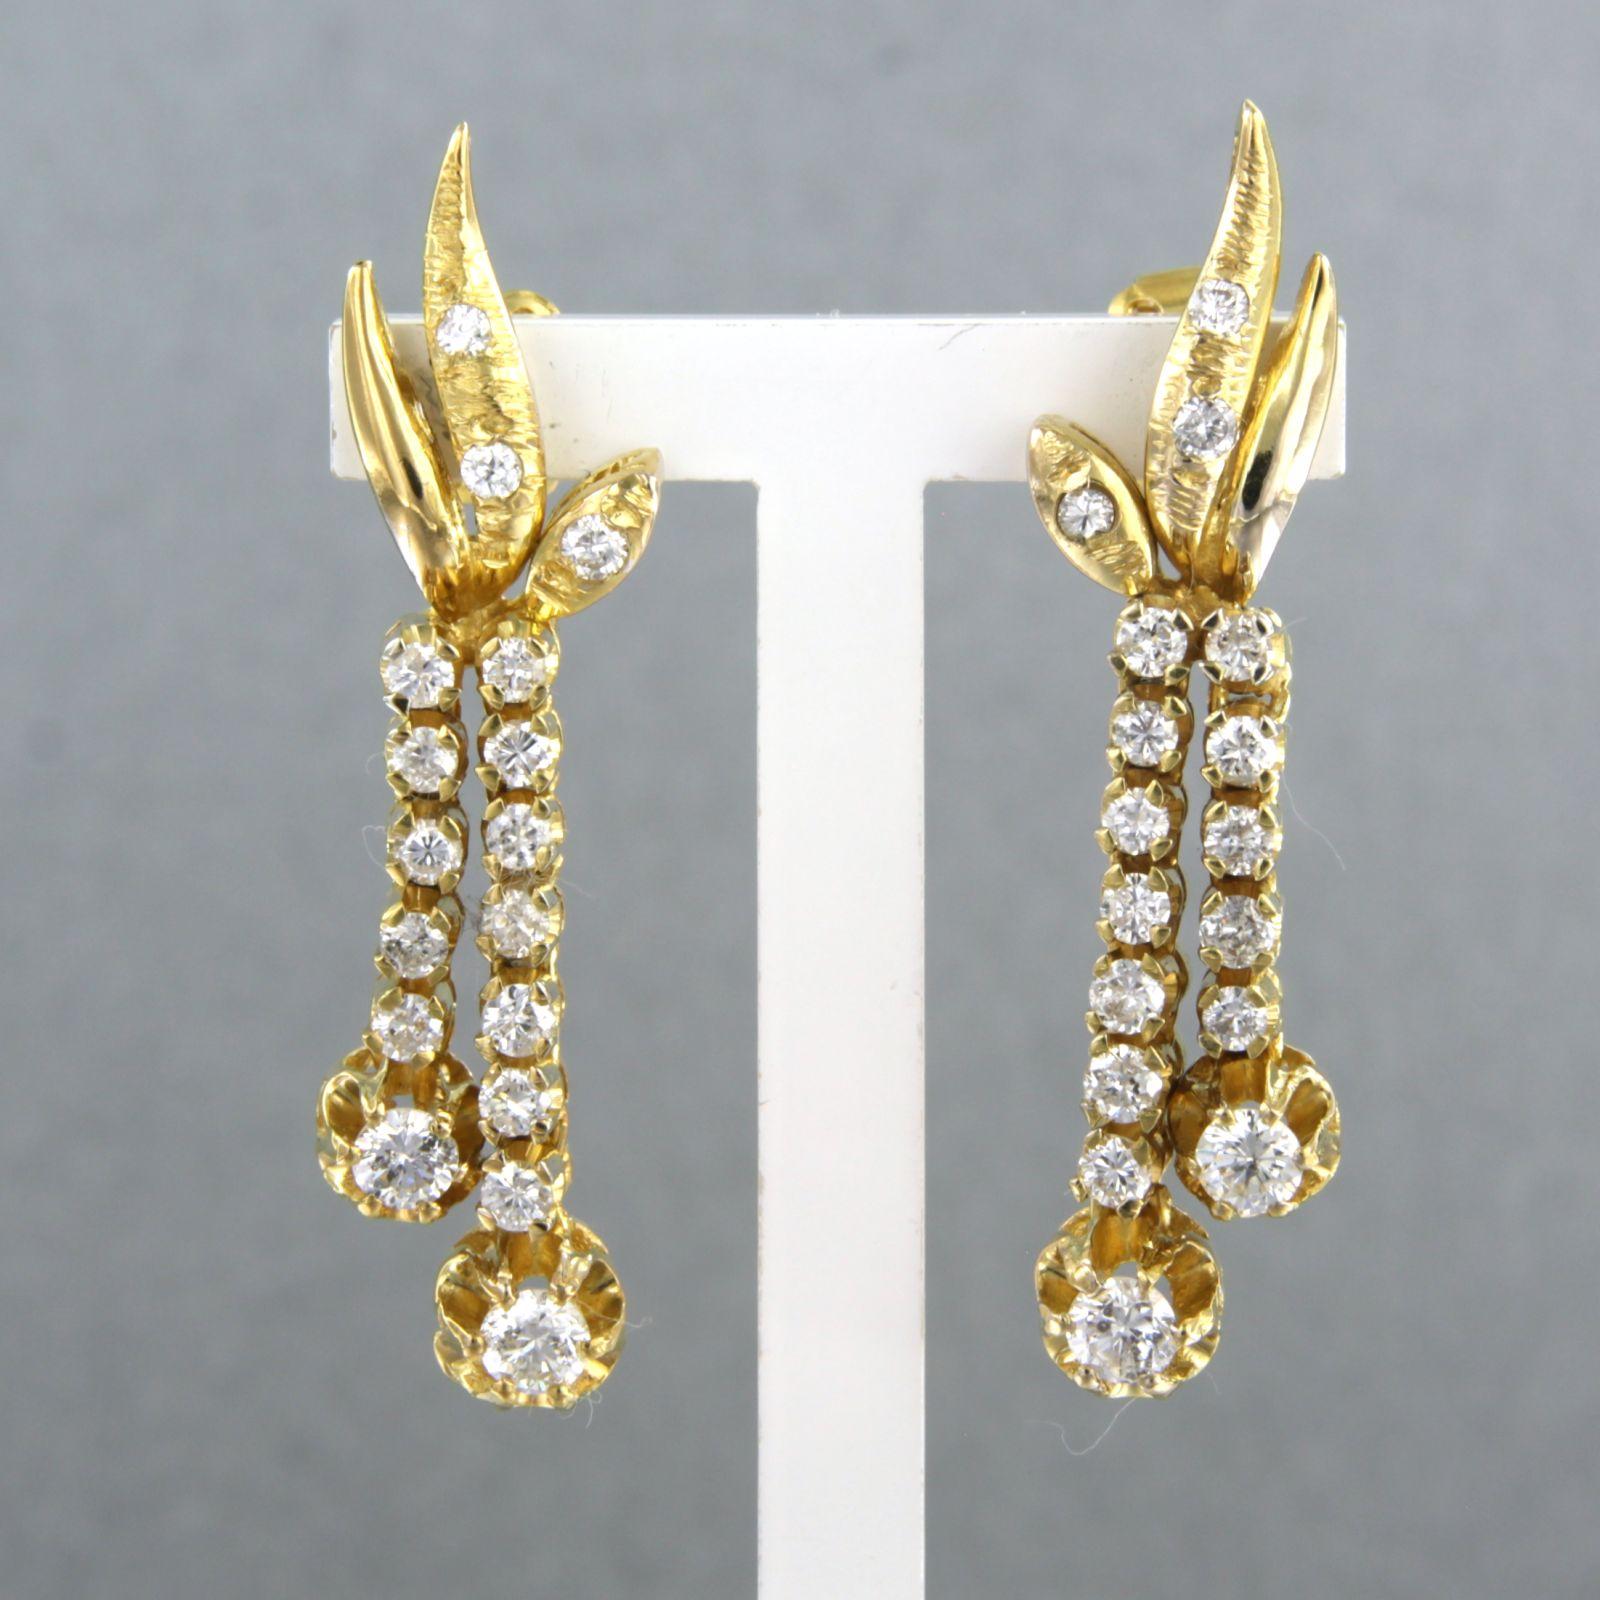 18k yellow gold earrings set with brilliant cut diamonds. 2.00ct - F/G - SI

detailed description

The size of the earring is 3.7 cm by 9.0 mm wide

weight: 10.4 grams

occupied with :

- 4 x 3.3 mm brilliant cut diamond, approximately 0.60 carats